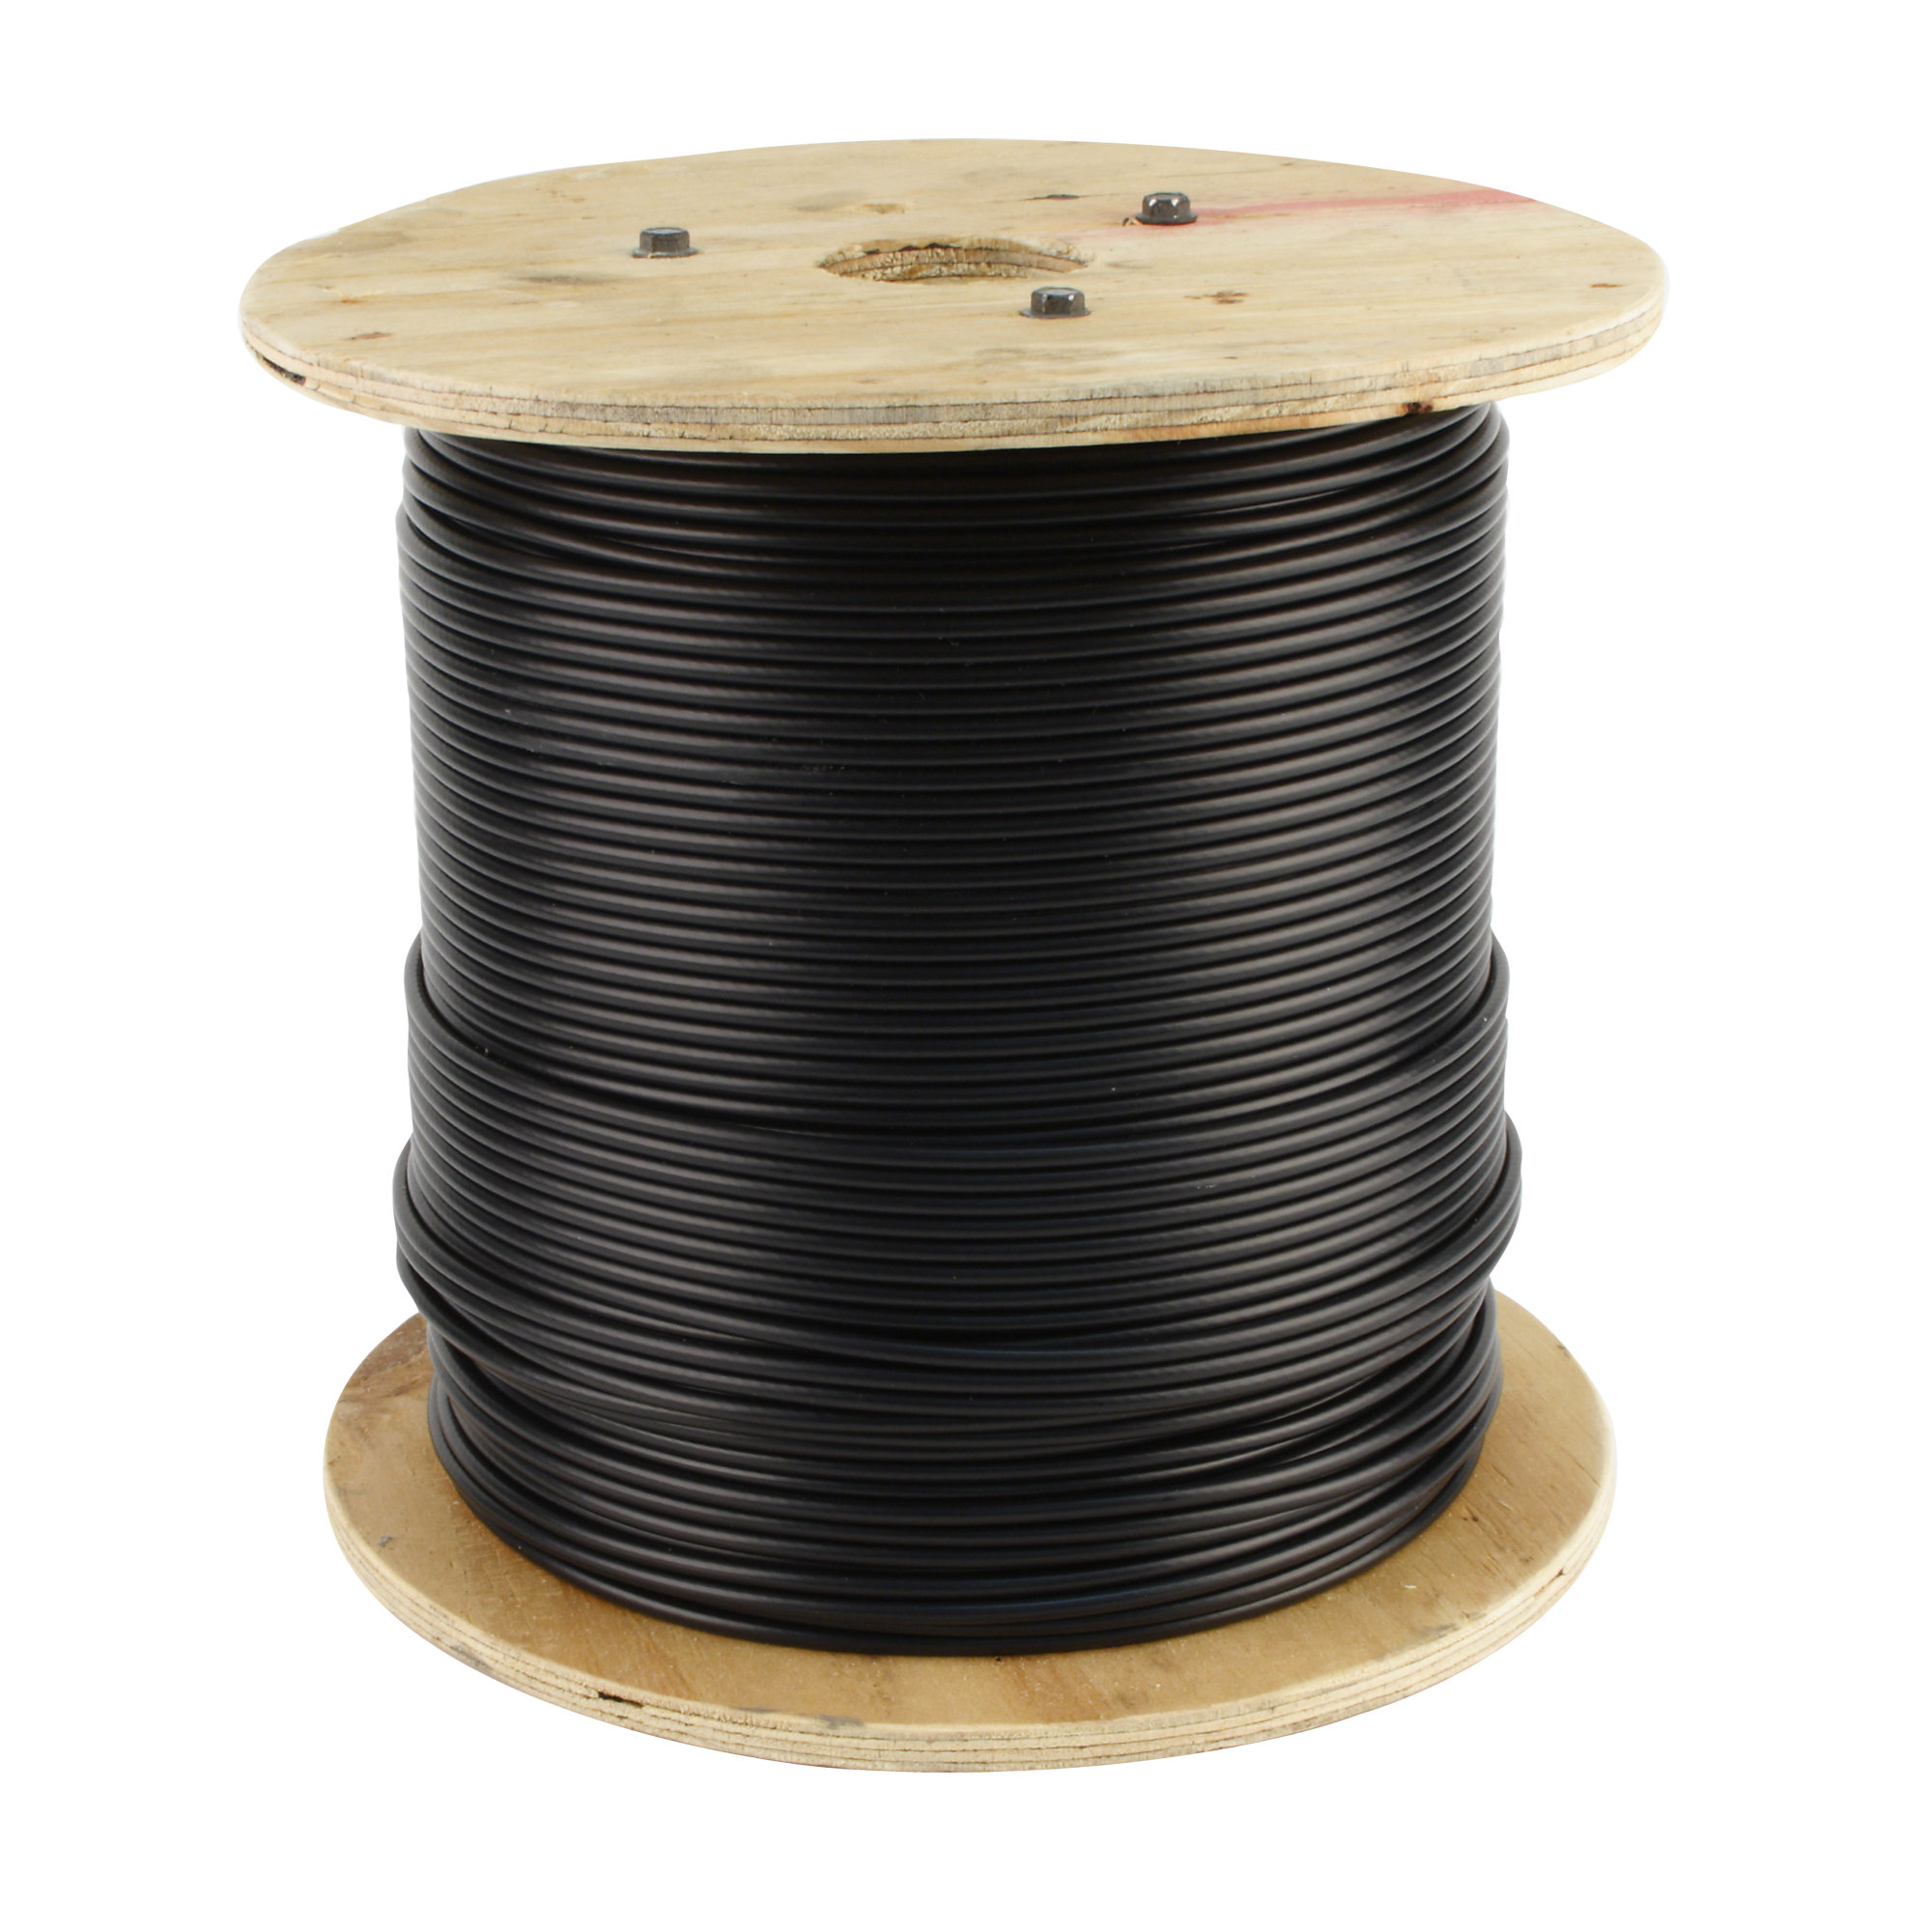 Cable 1000FT Reel, 1/4" Diameter with Black Nylon Coating